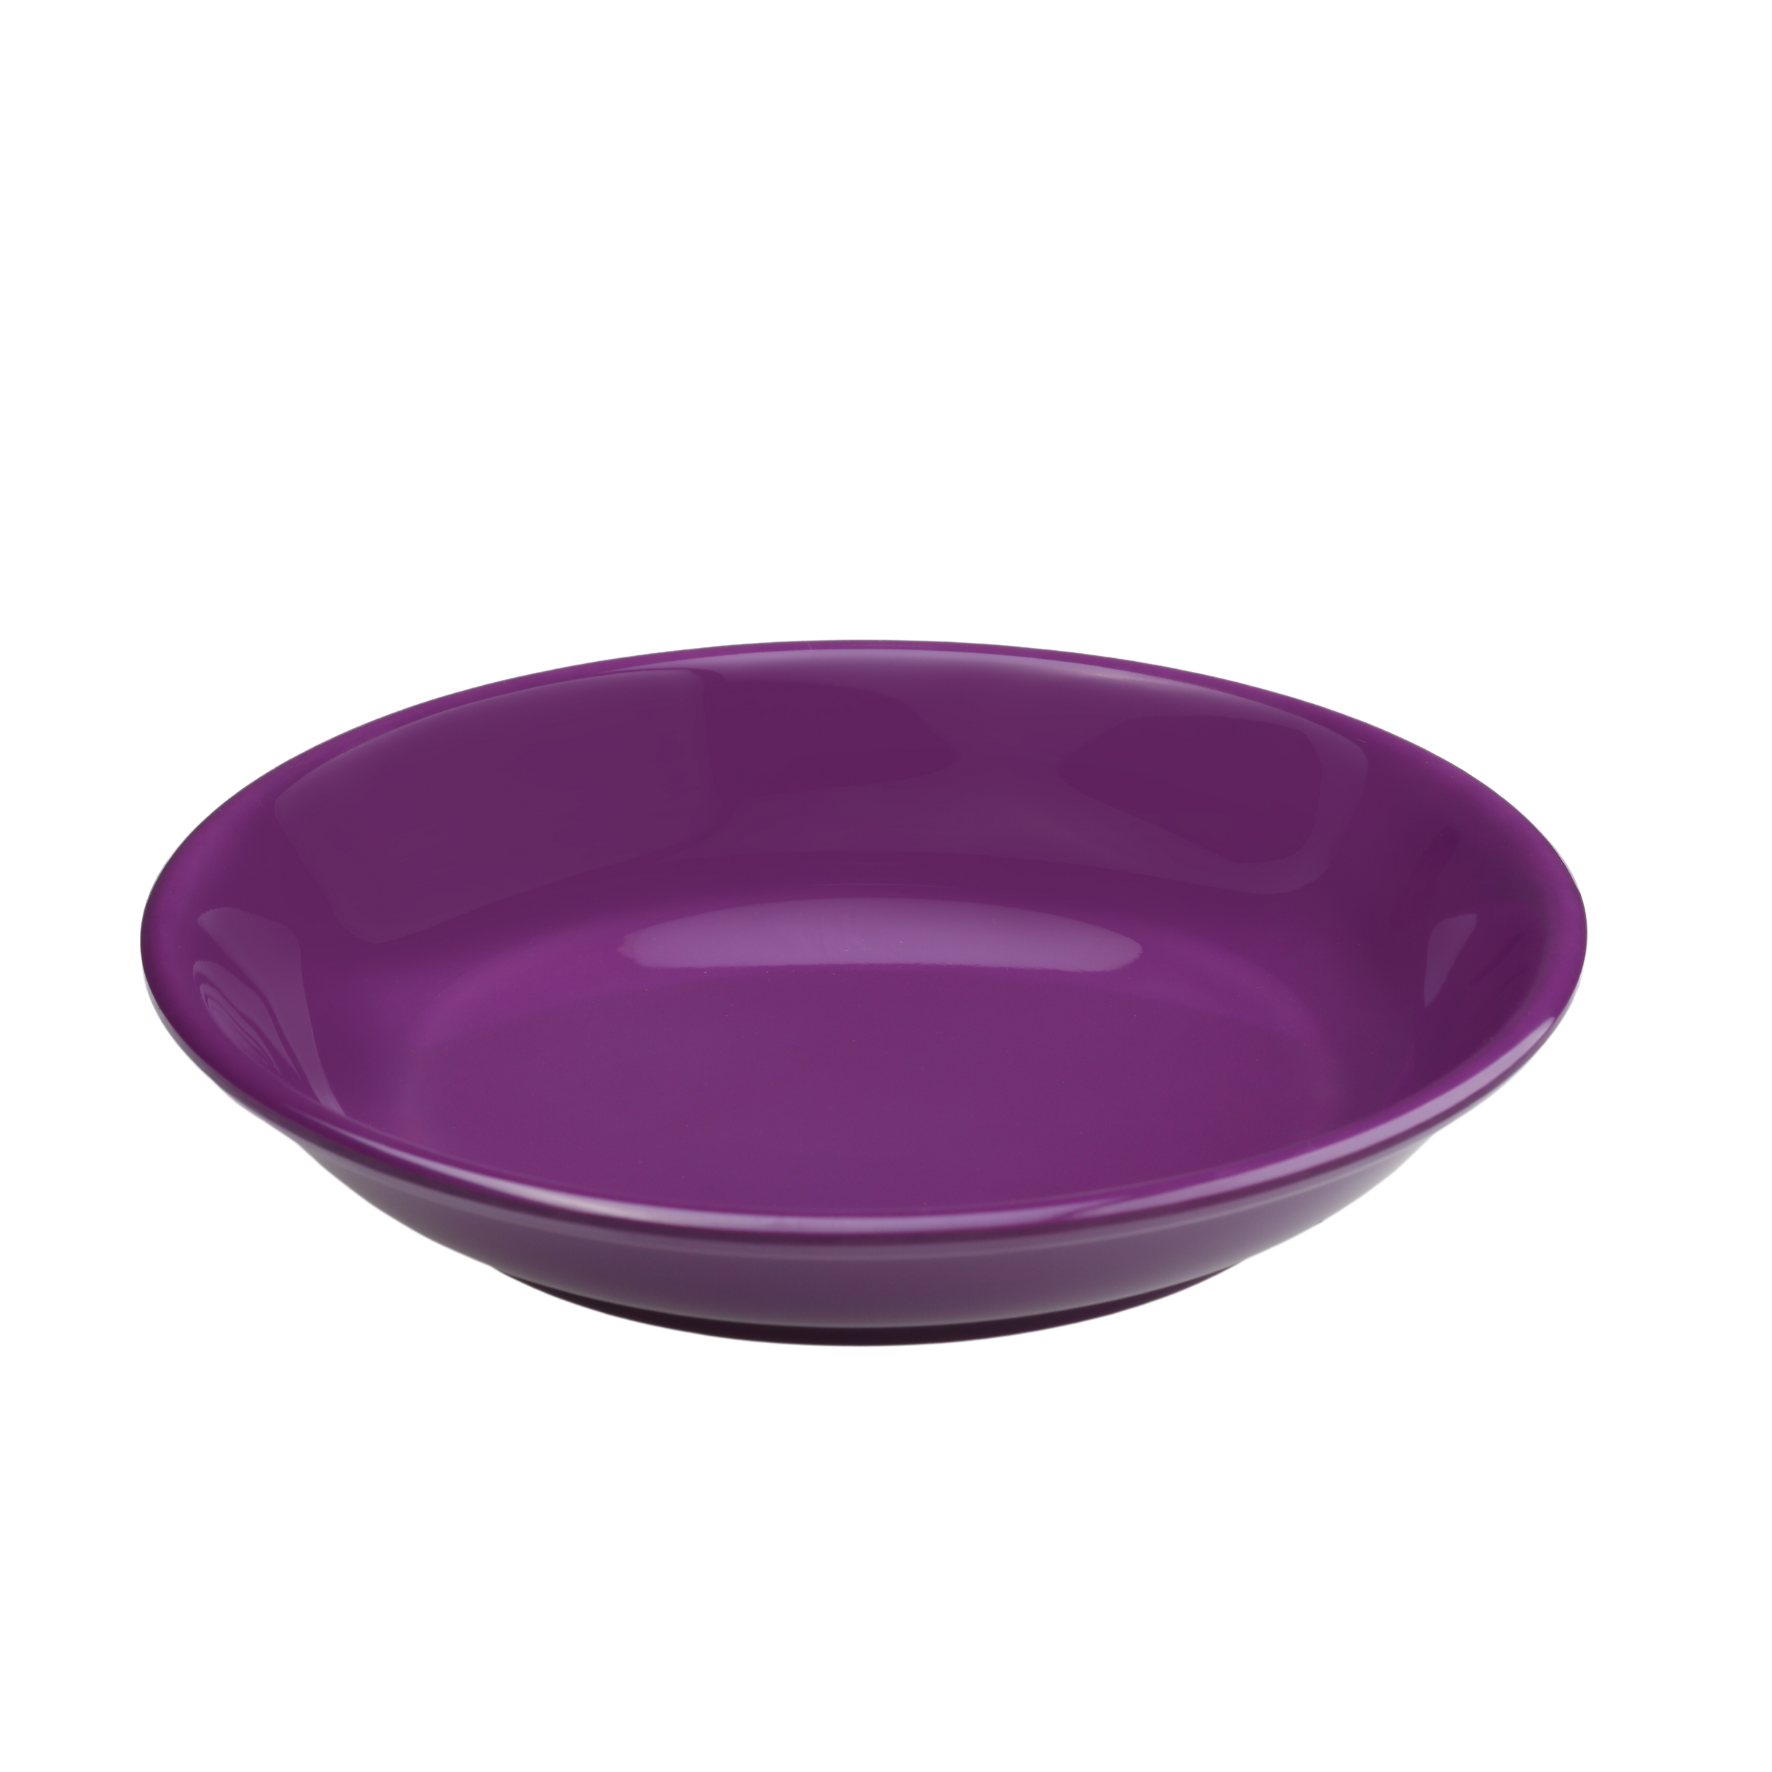 The Plate Story - Snack Plate 6.5” for Toddler - Cadbury Purple